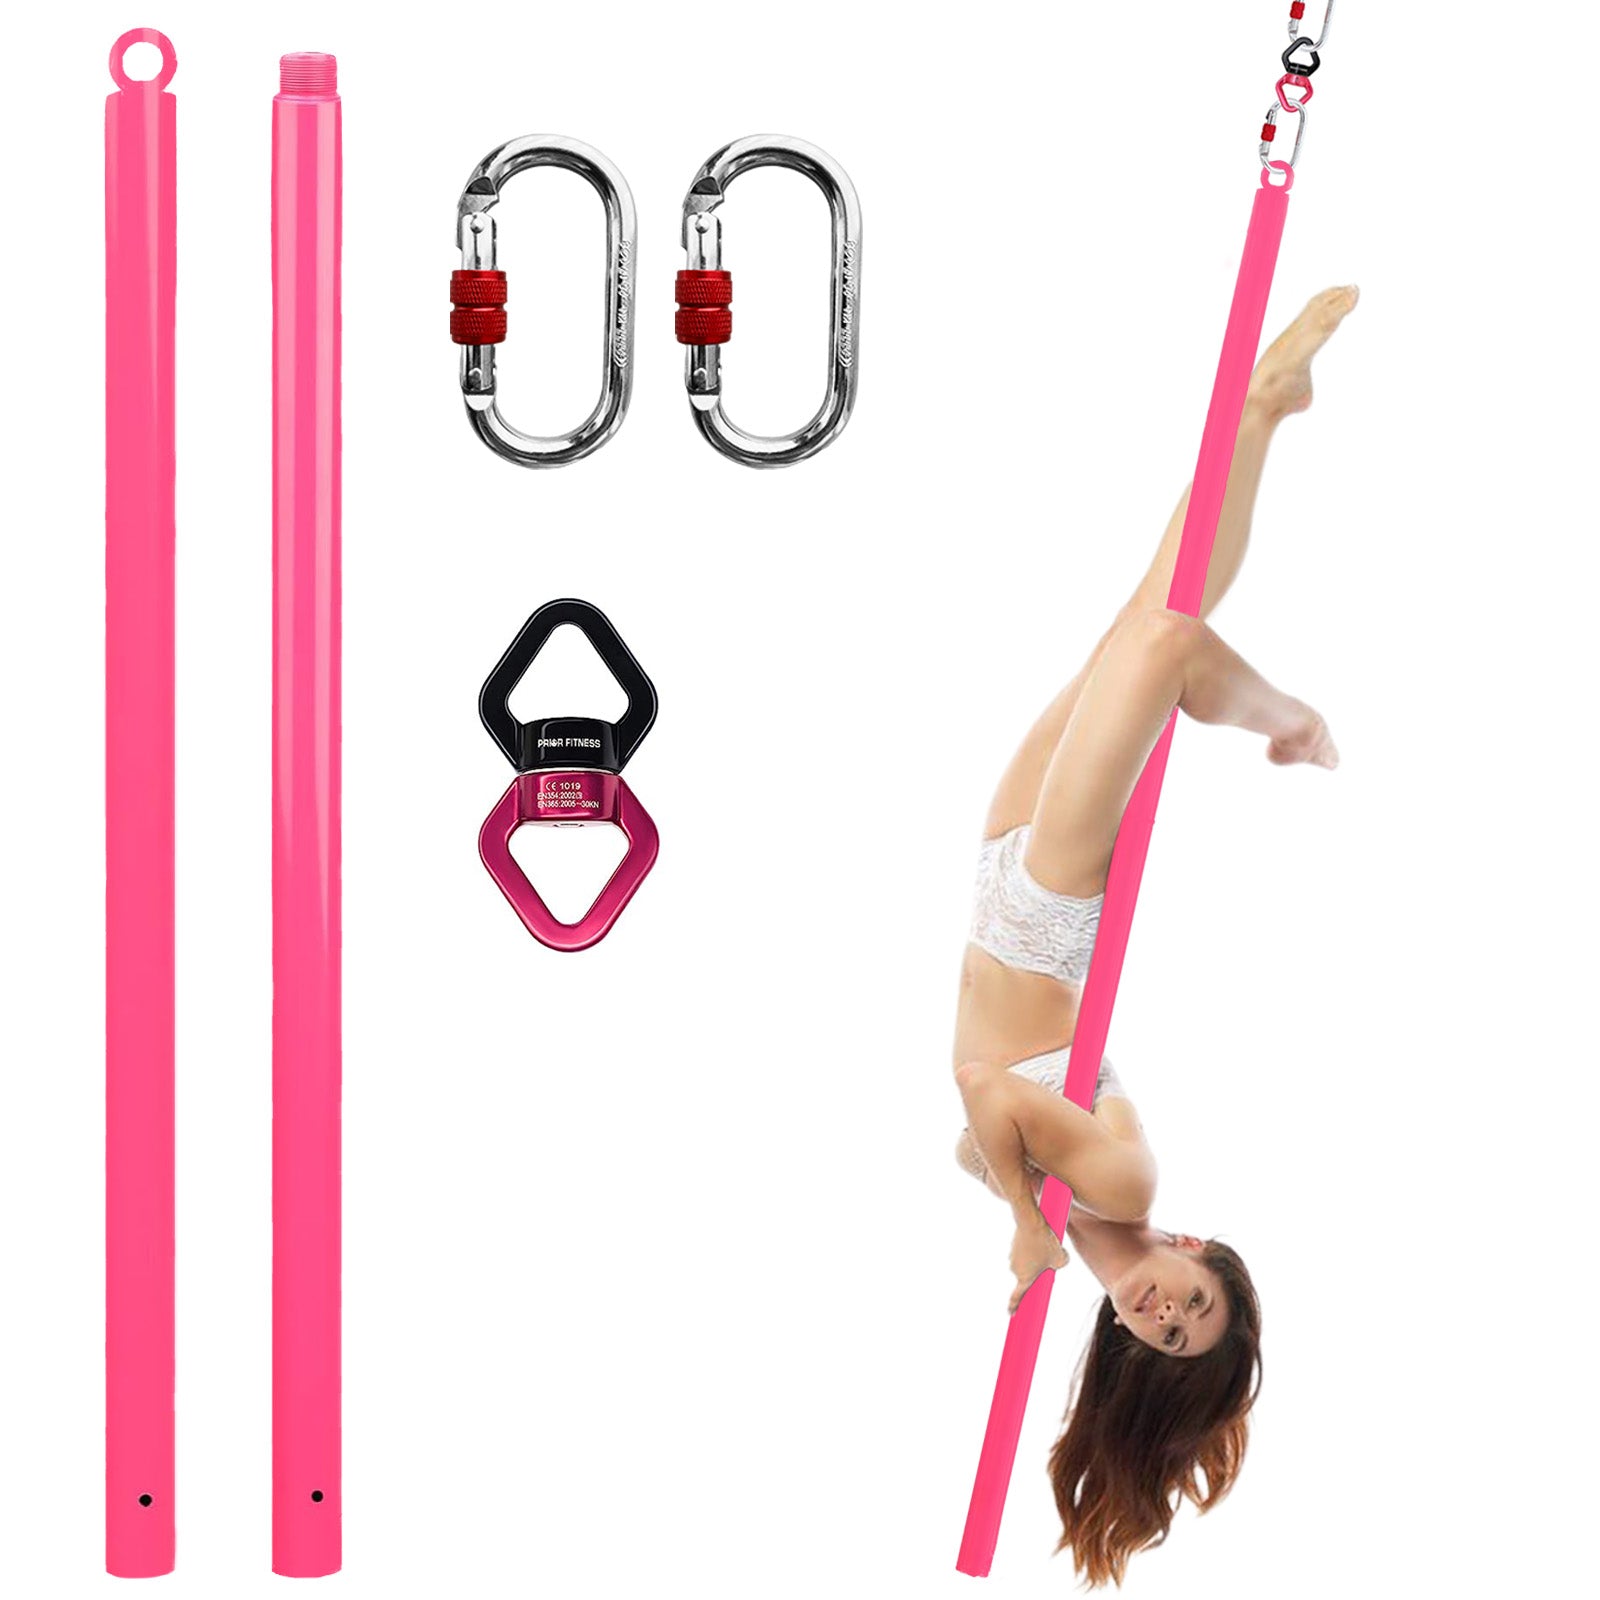 PRIORMAN Flying Aerial Dance Pole for Home Spinning Aerial Pole